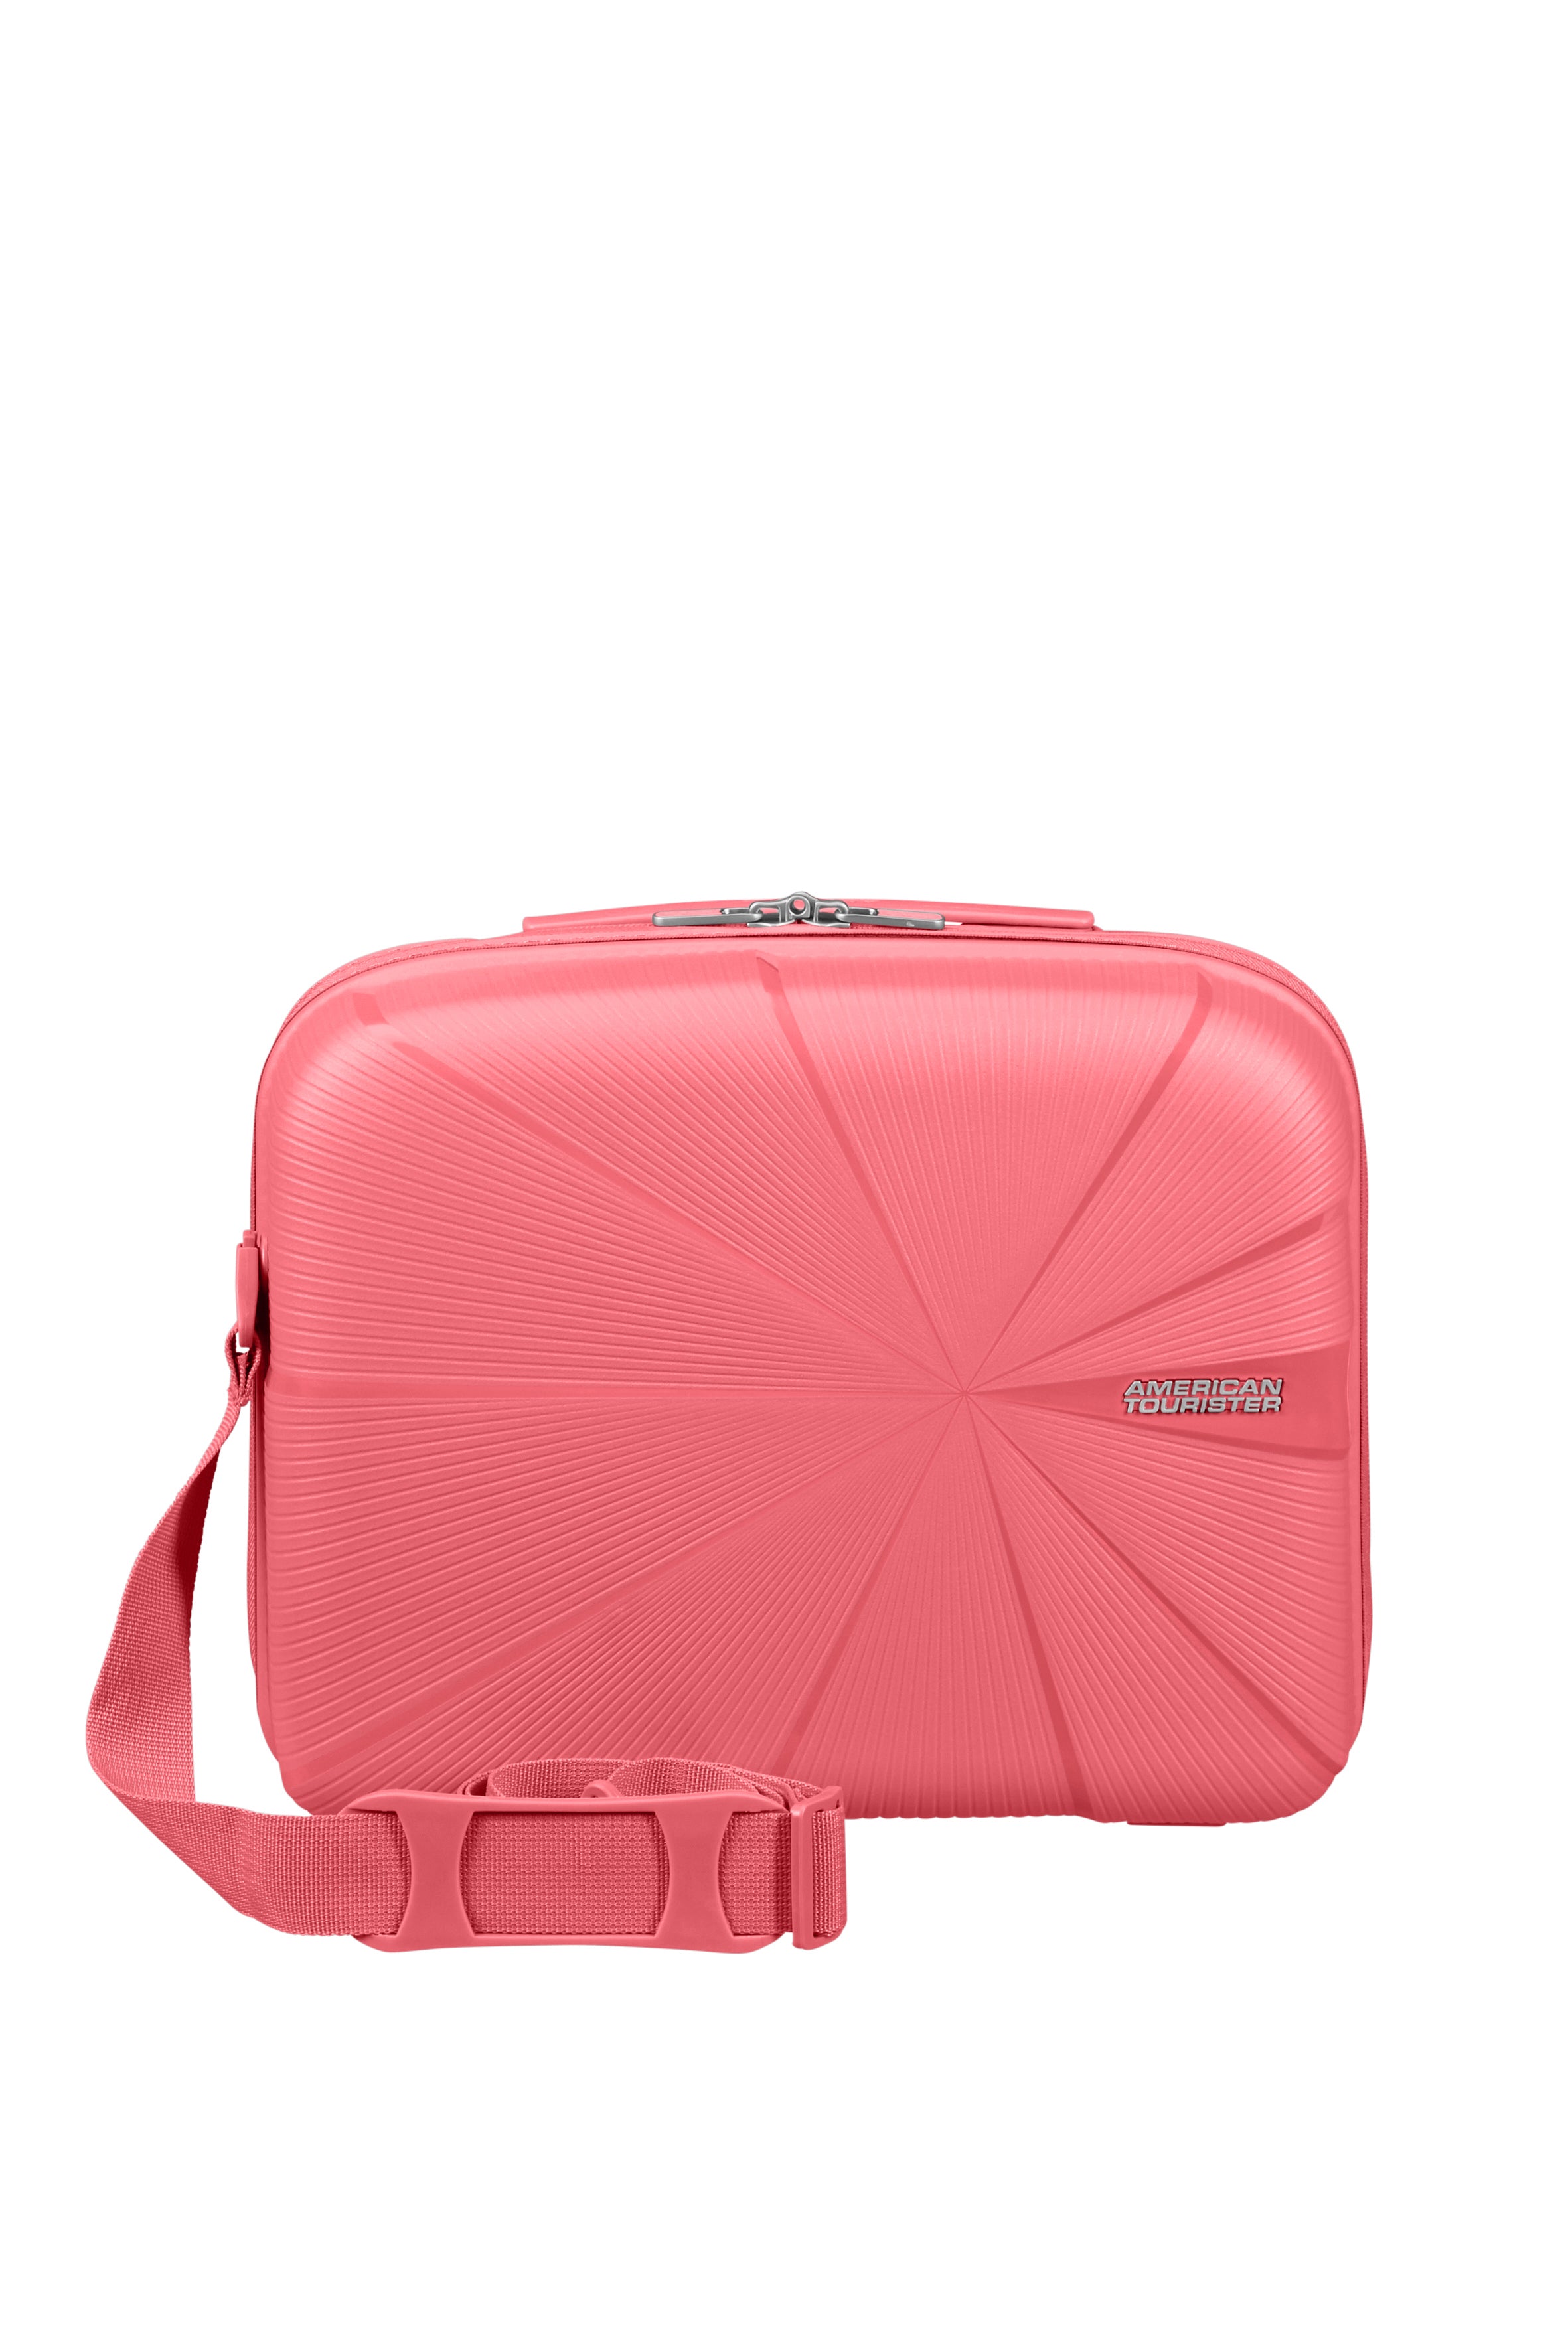 American Tourister - Star Vibe Beauty Case - Sun kissed Coral-1